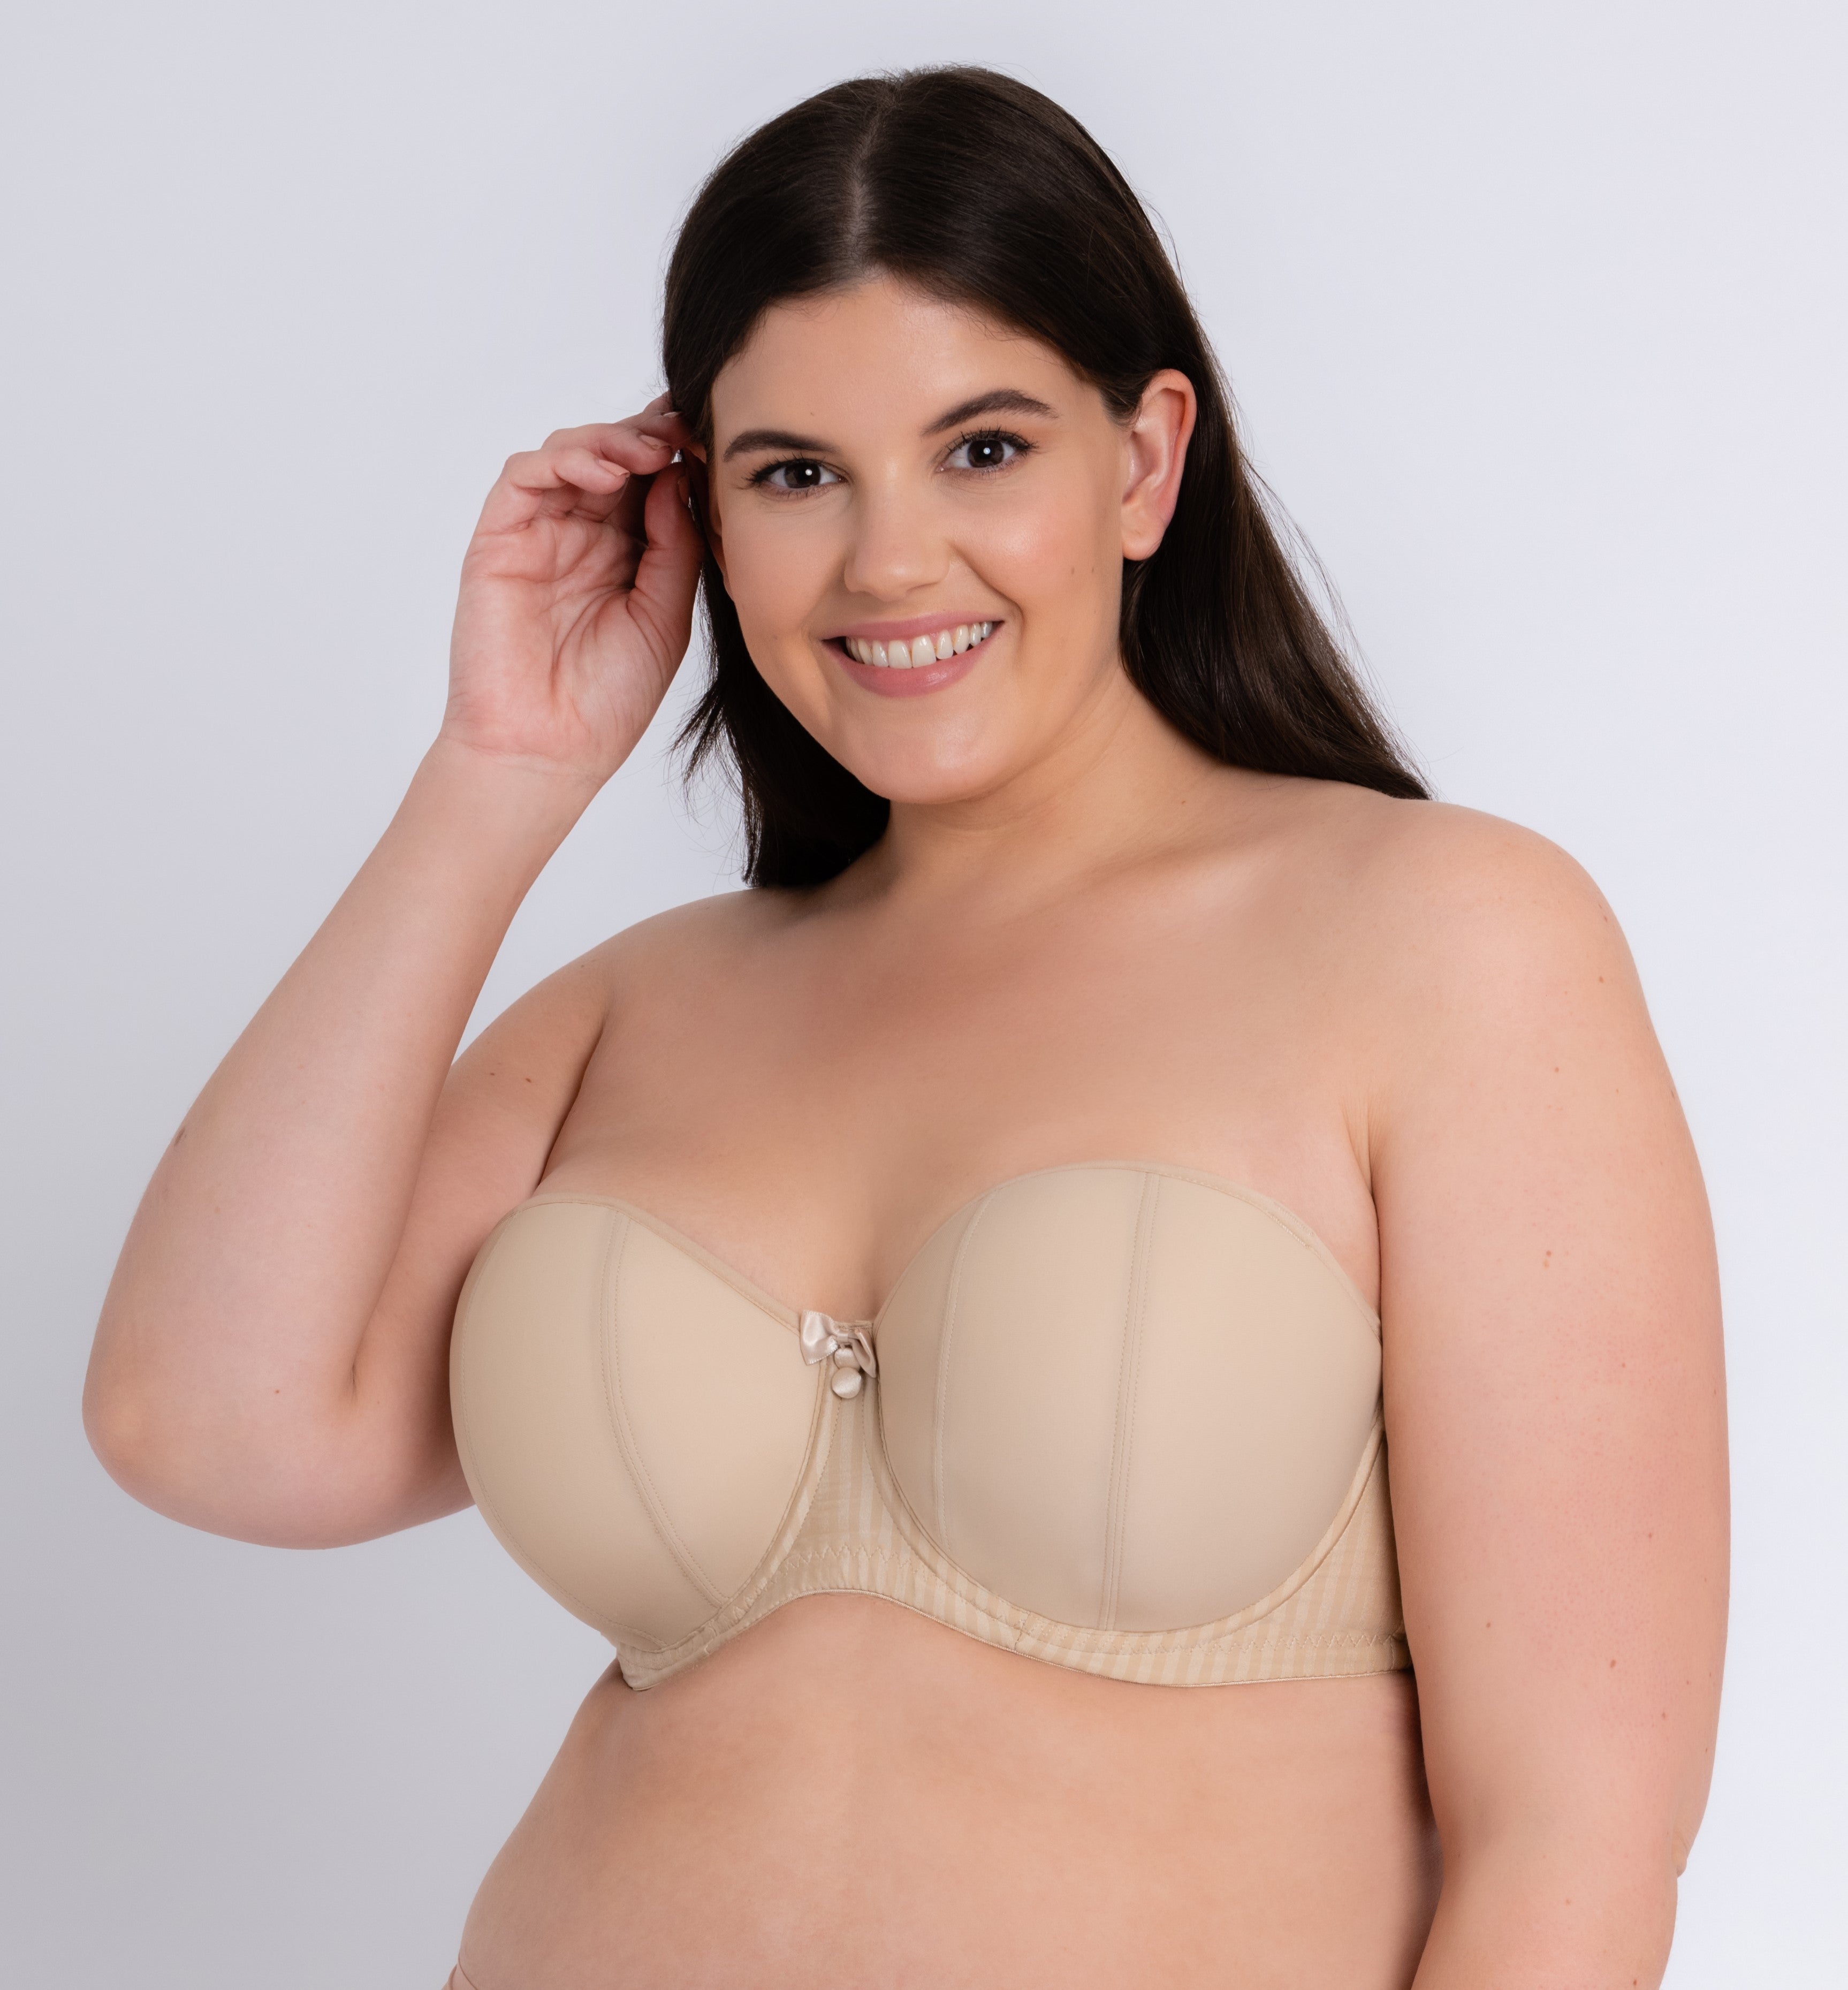 Luxe strapless – The Pencil Test